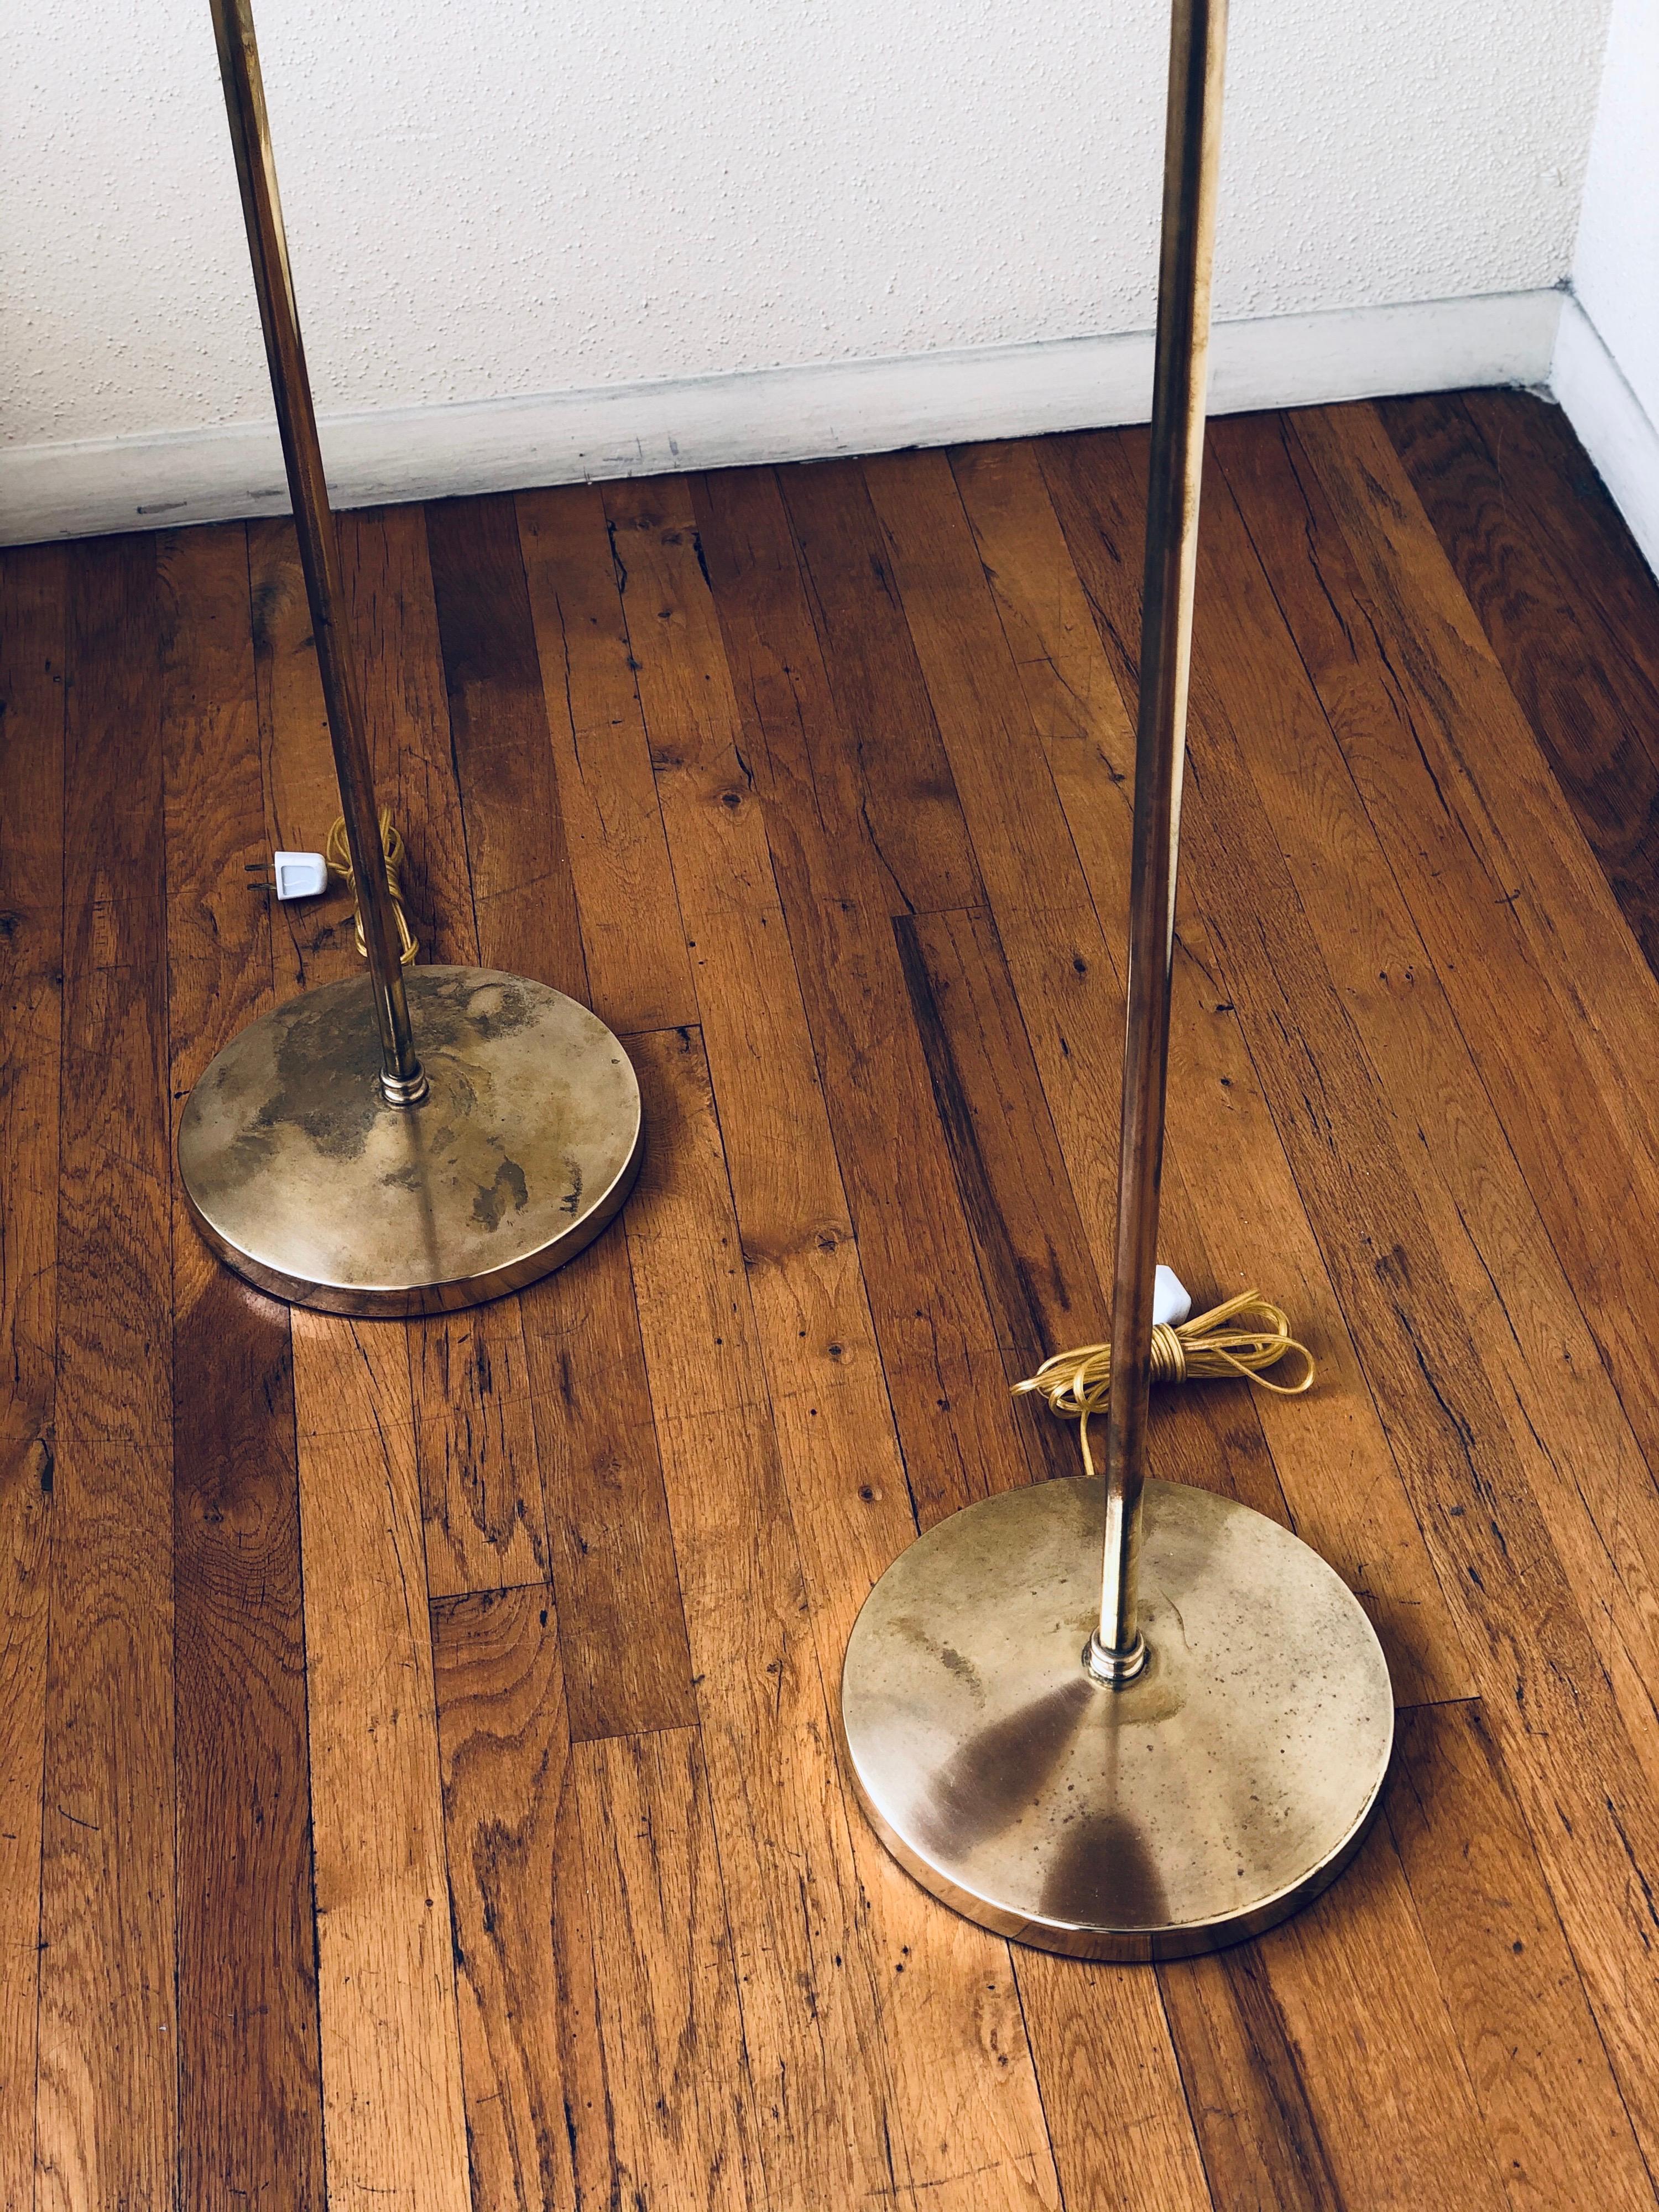 Swedish Pair of Hans-Agne Jakobsson Polished Brass Floor Lamps For Sale